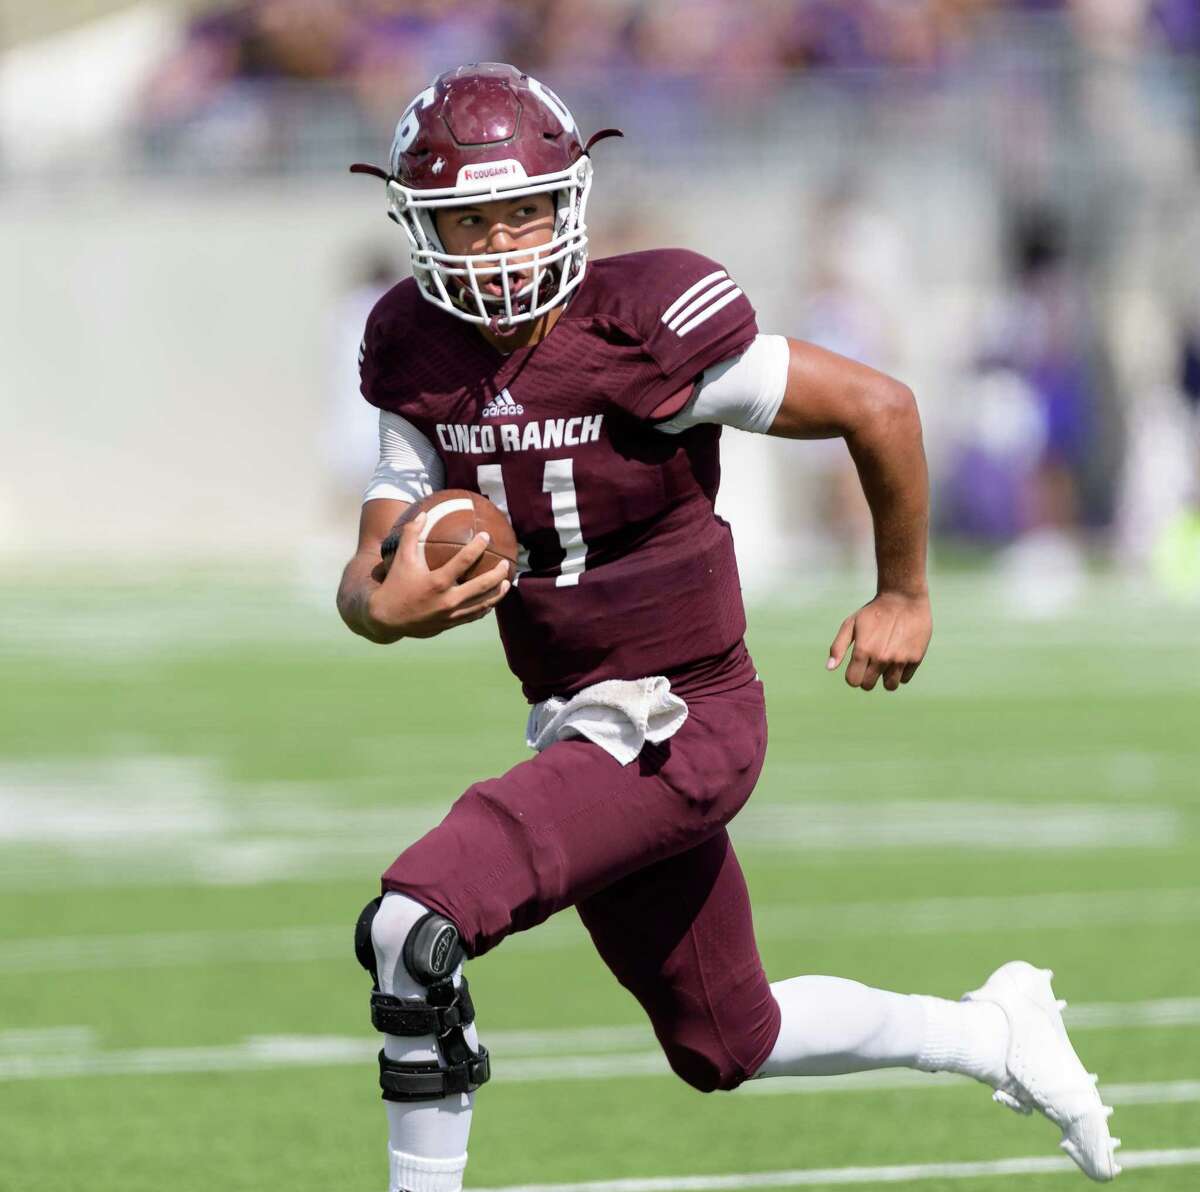 Cam Harper (11) of the Cinco Ranch Cougars runs around right end in the second half against the Morton Ranch Mavericks in a high school football game on Saturday, November 4, 2017 at Legacy Stadium in Katy Texas.